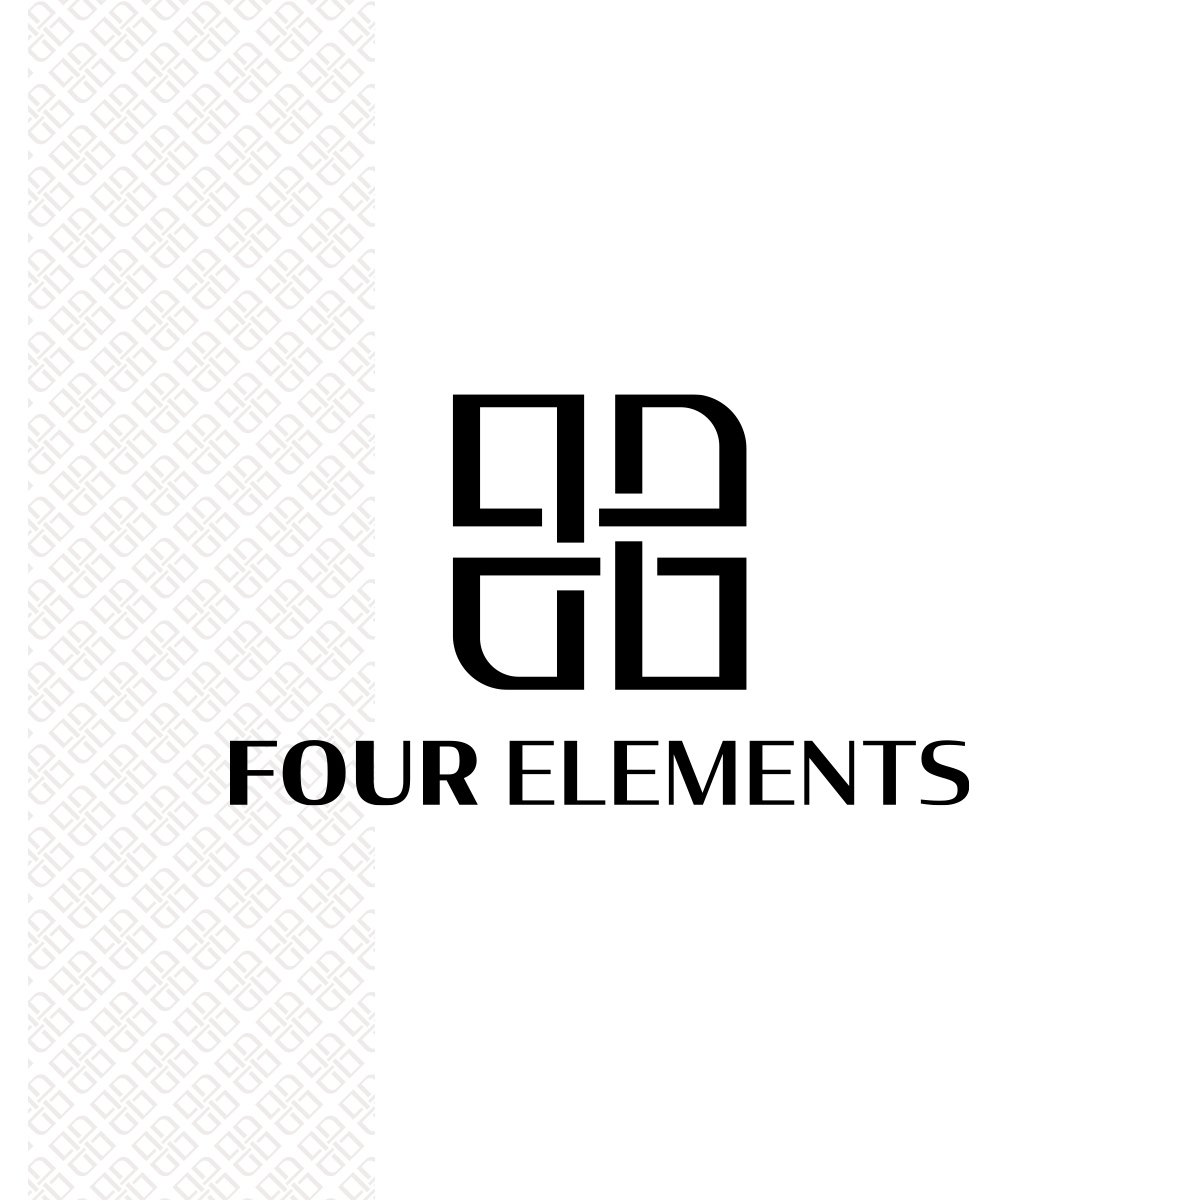 (c) Four-elements.at